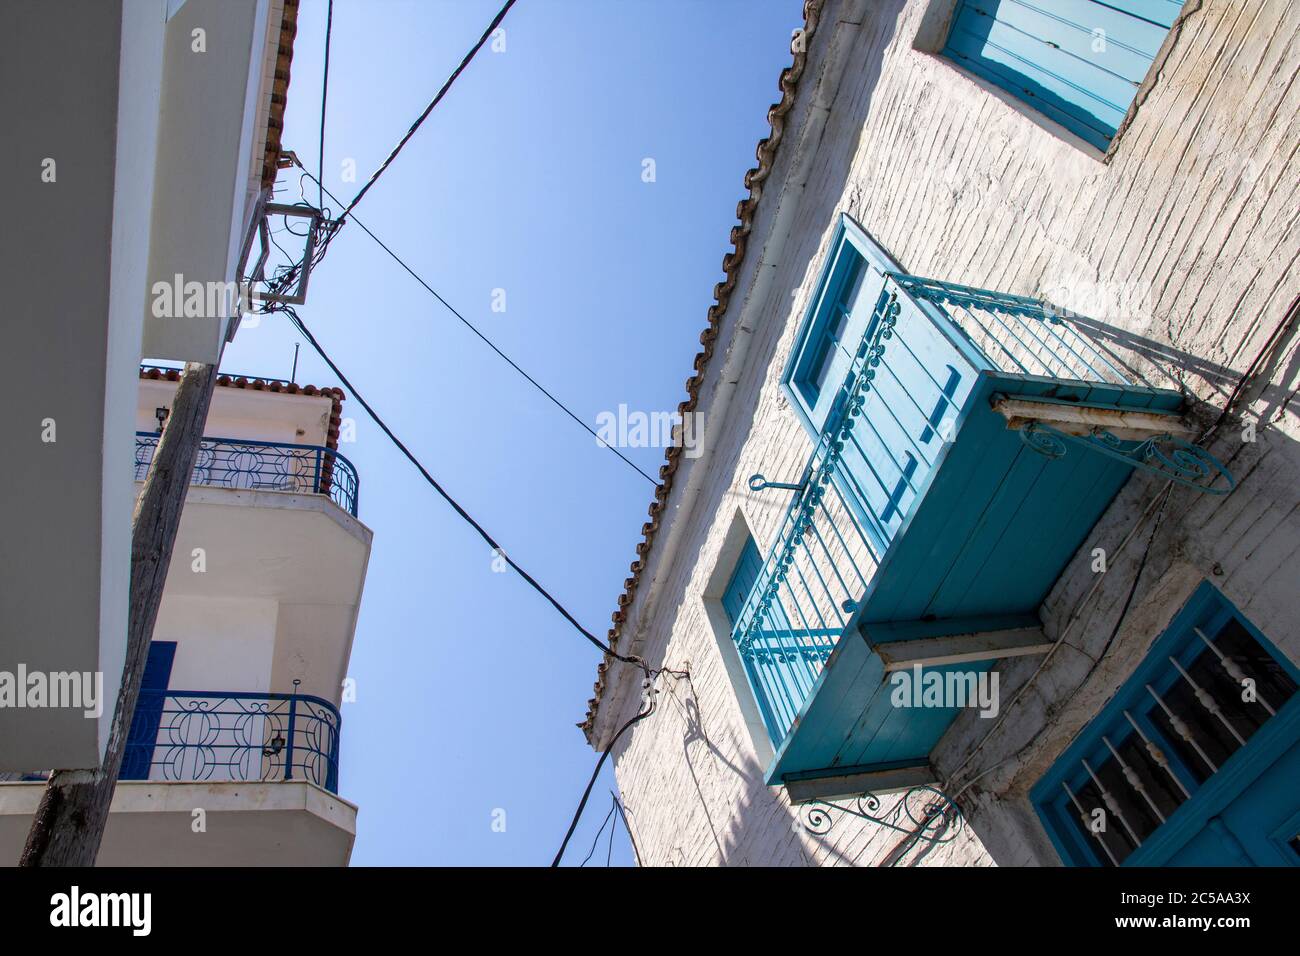 SKIATHOS, GREECE - AUGUST 13, 2019. Looking up at balcony on traditional house, Skiathos Town, Greece, August 13, 2019. Stock Photo